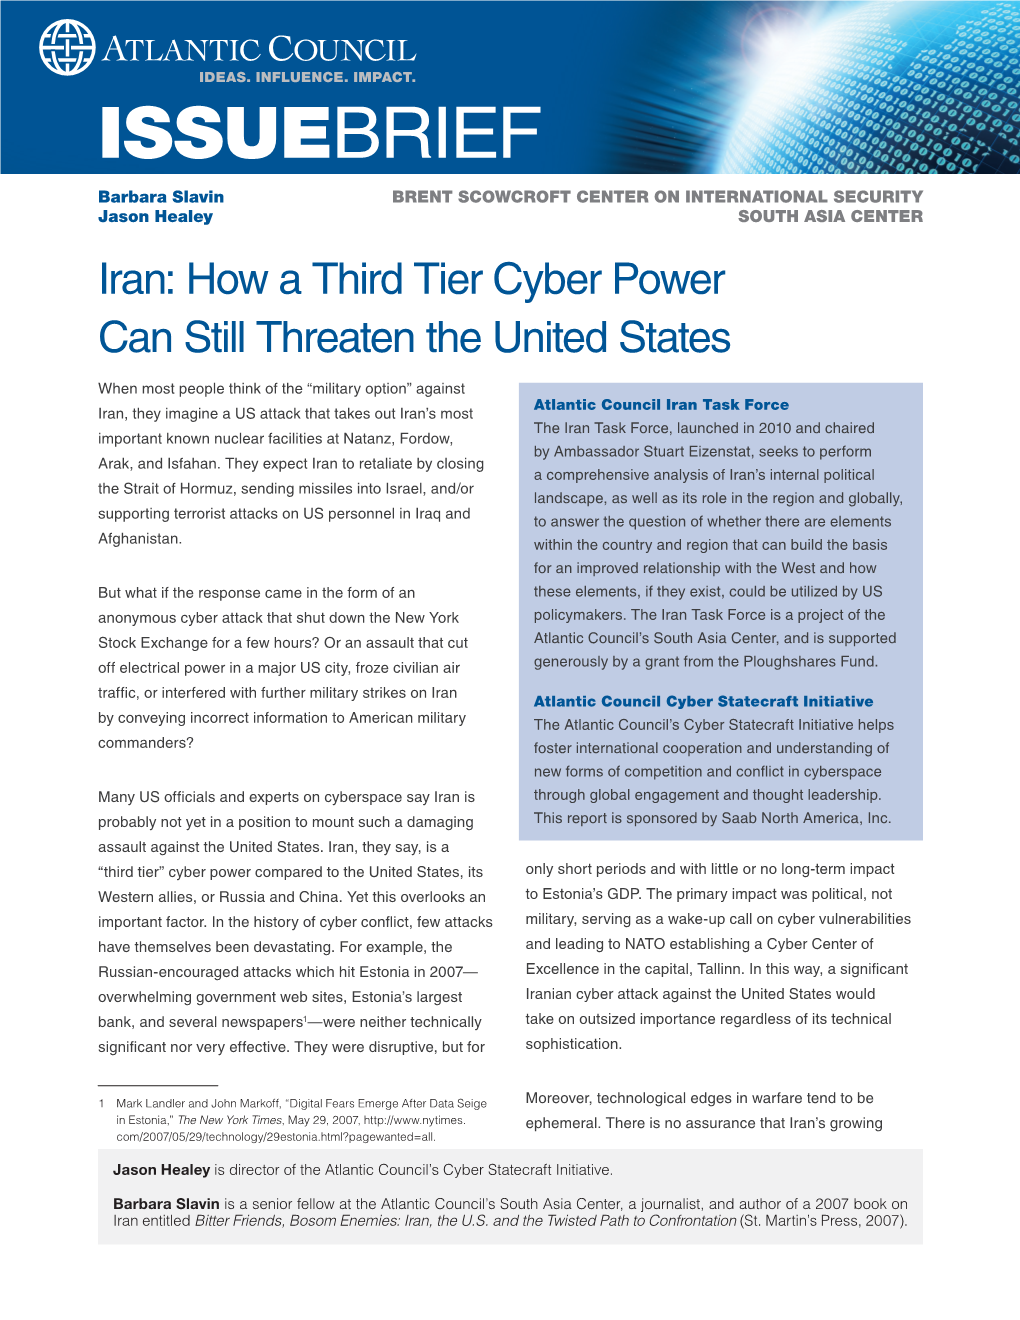 Iran: How a Third Tier Cyber Power Can Still Threaten the United States